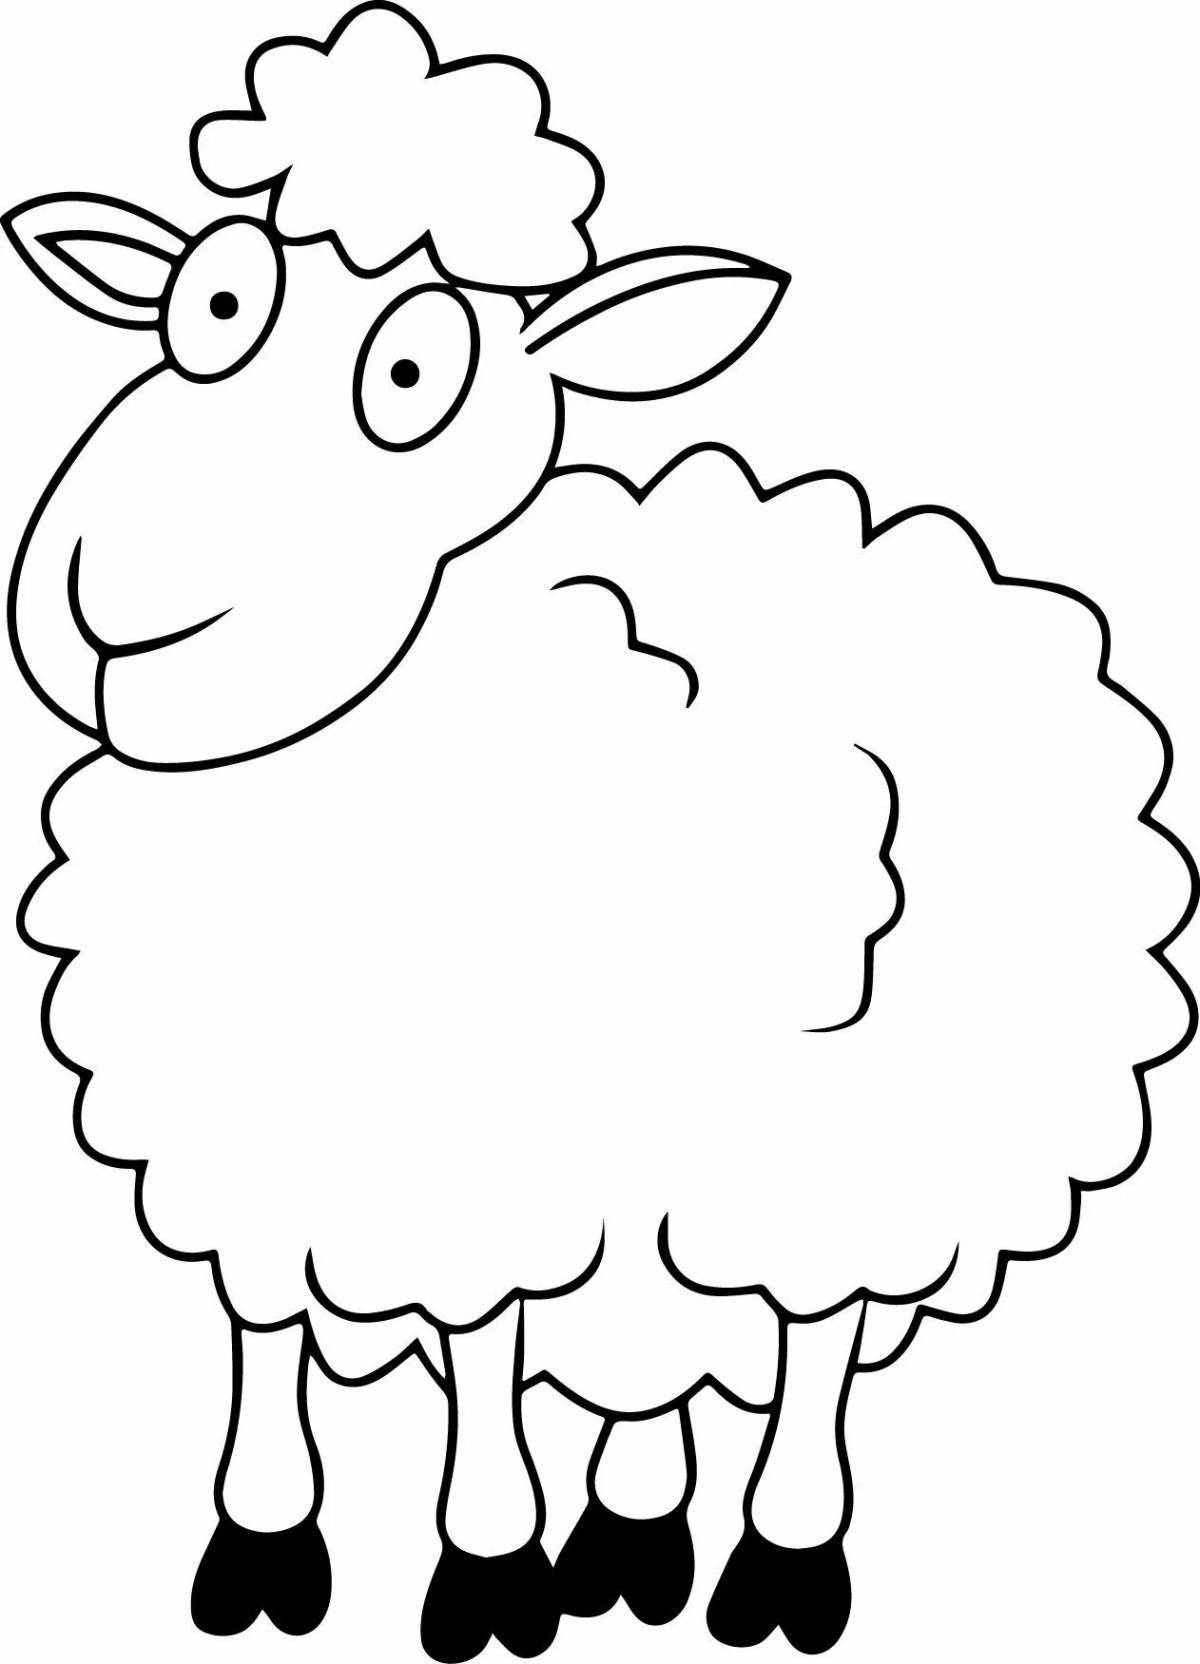 Sheep coloring game for kids